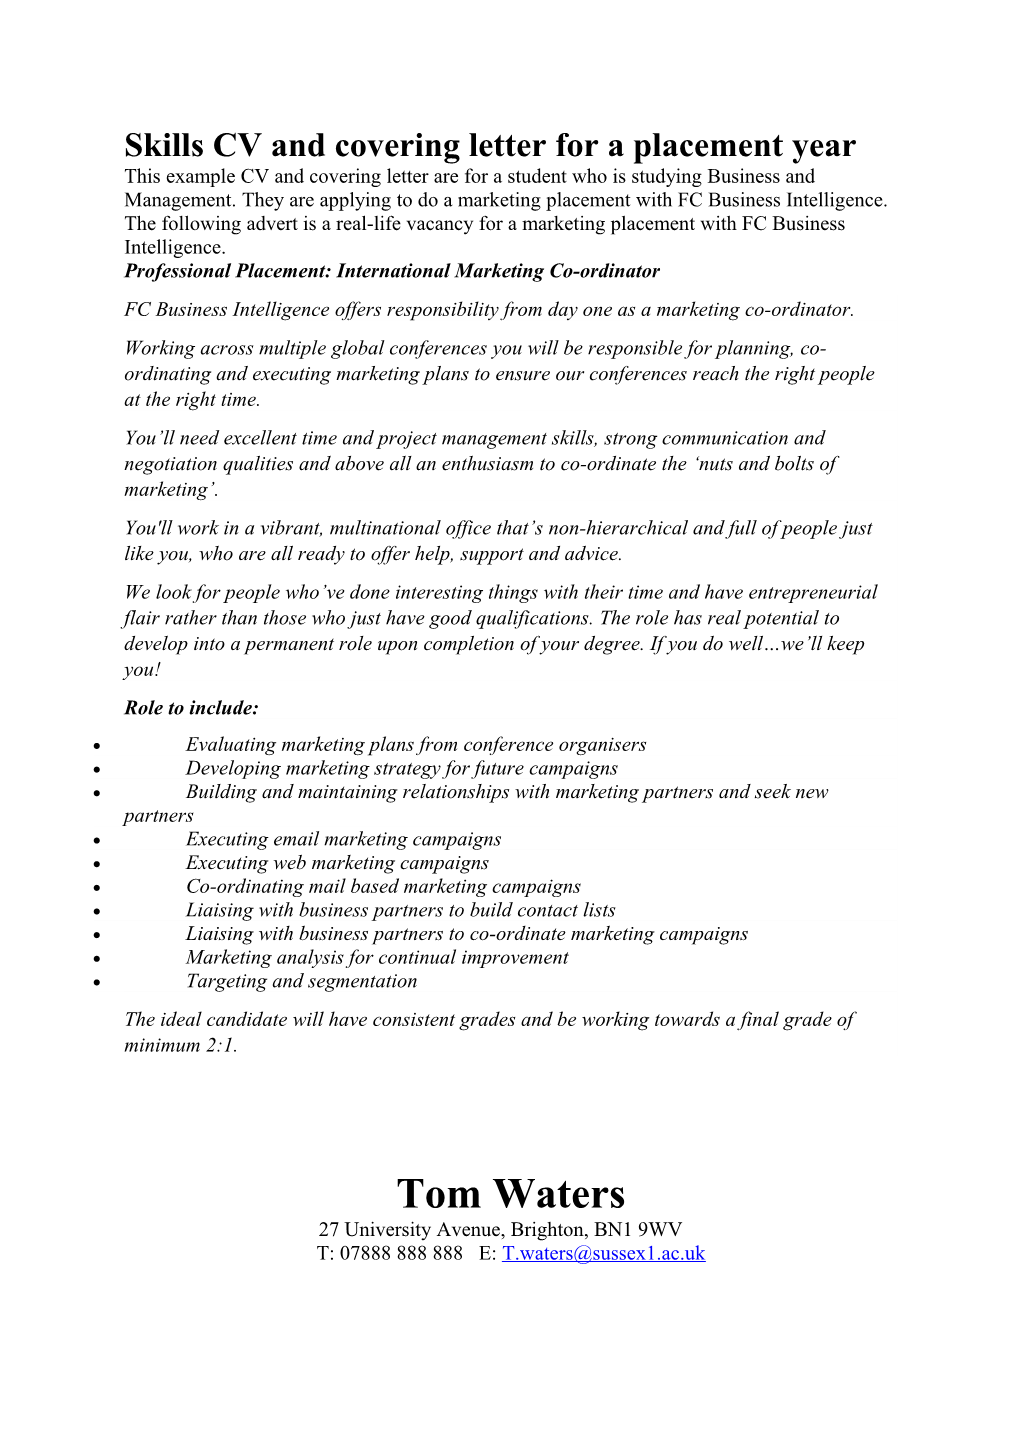 Skills CV and Covering Letter for a Placement Year